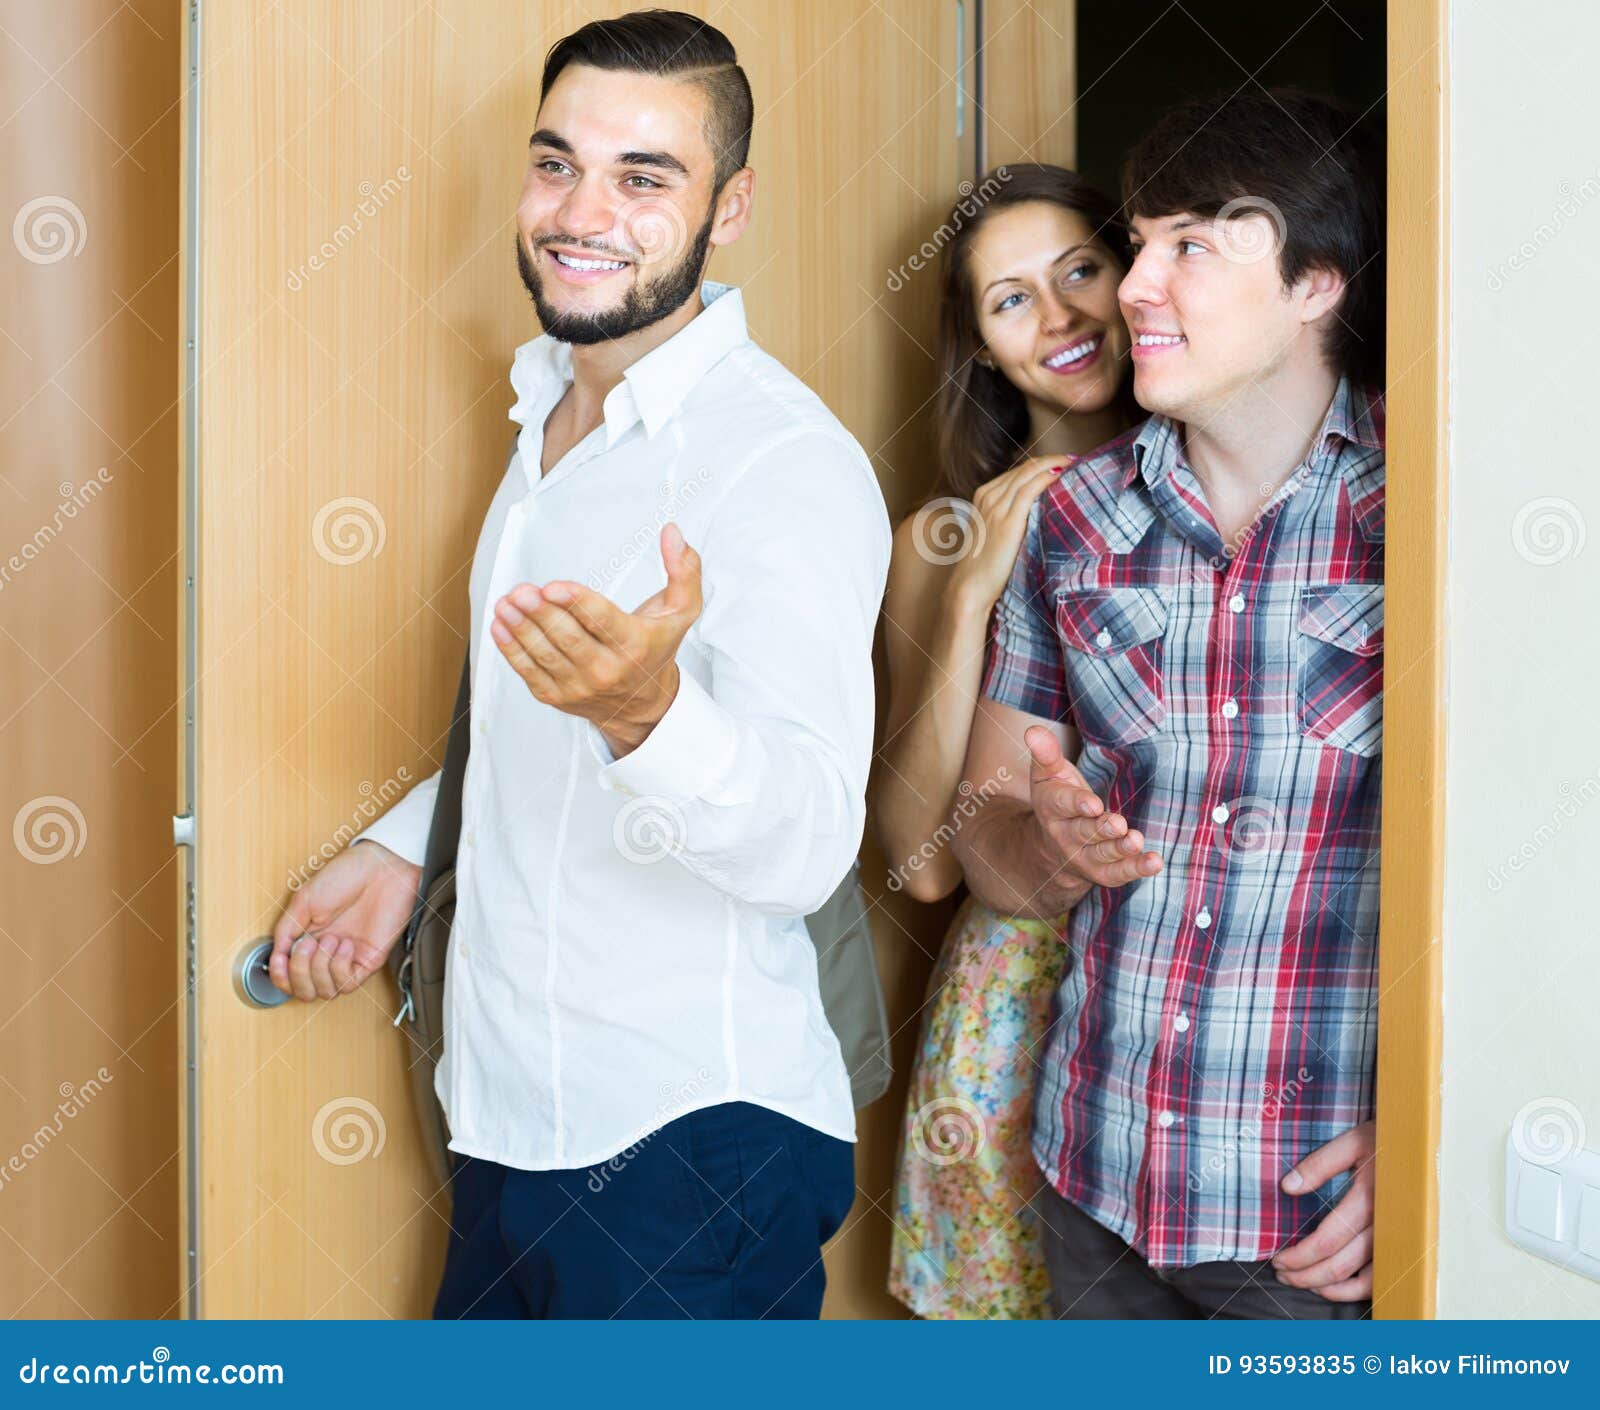 Realtor Showing New Apartment To Couple Stock Image Image Of Apartment Real 93593835 